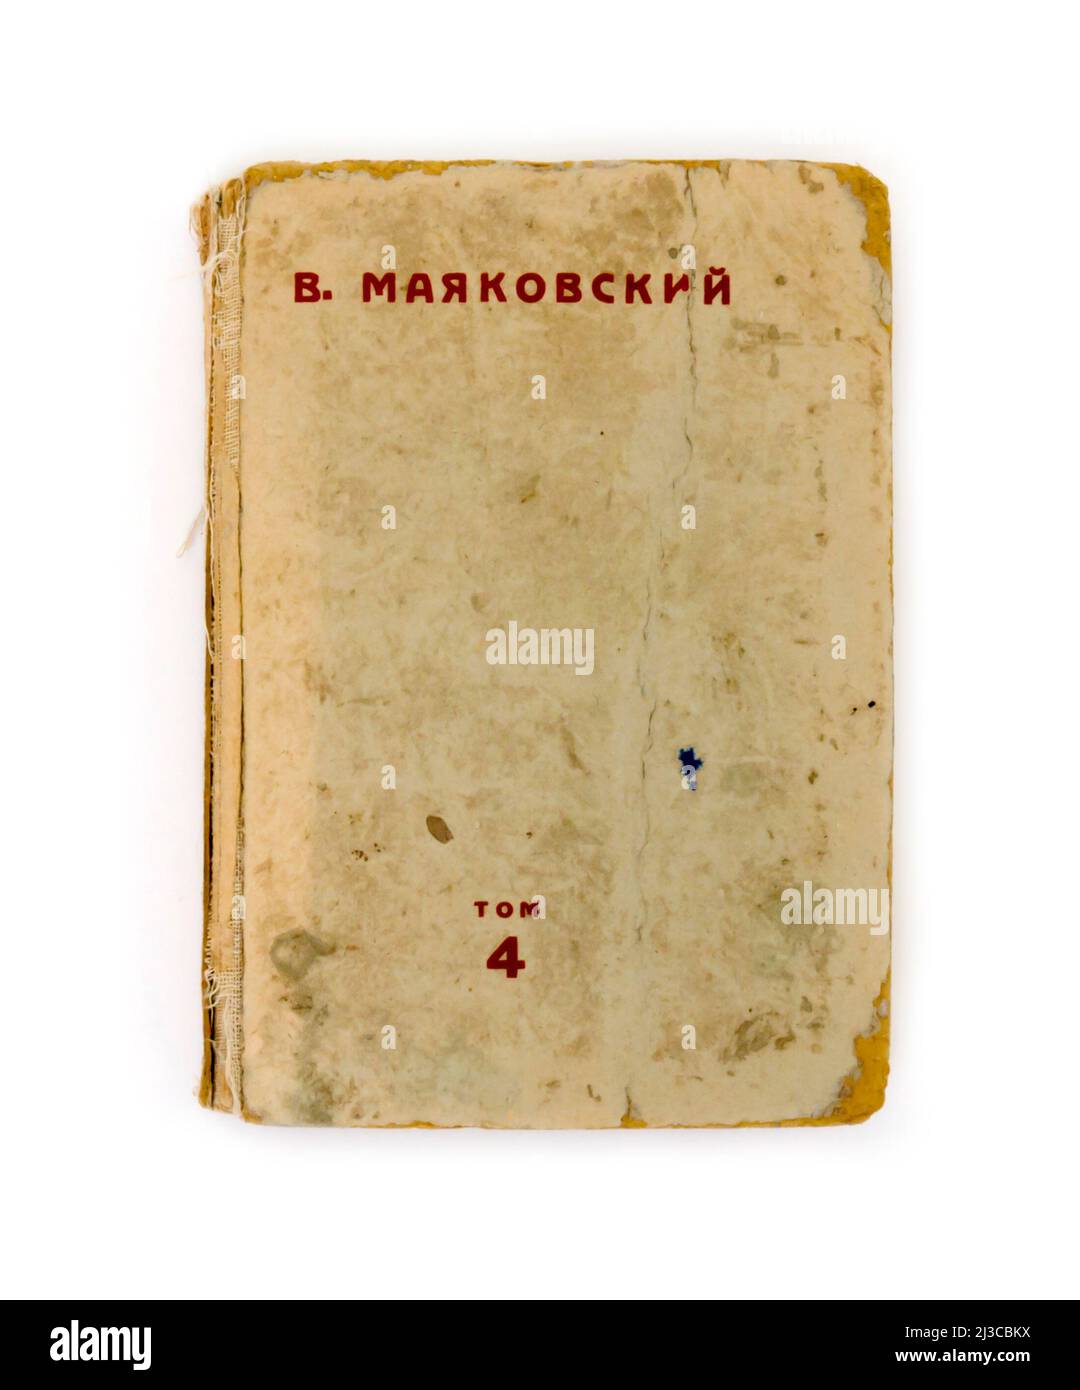 Collected Works of Vladimir Mayakovsky, vol.4 first published in 1929 in USSR. Stock Photo